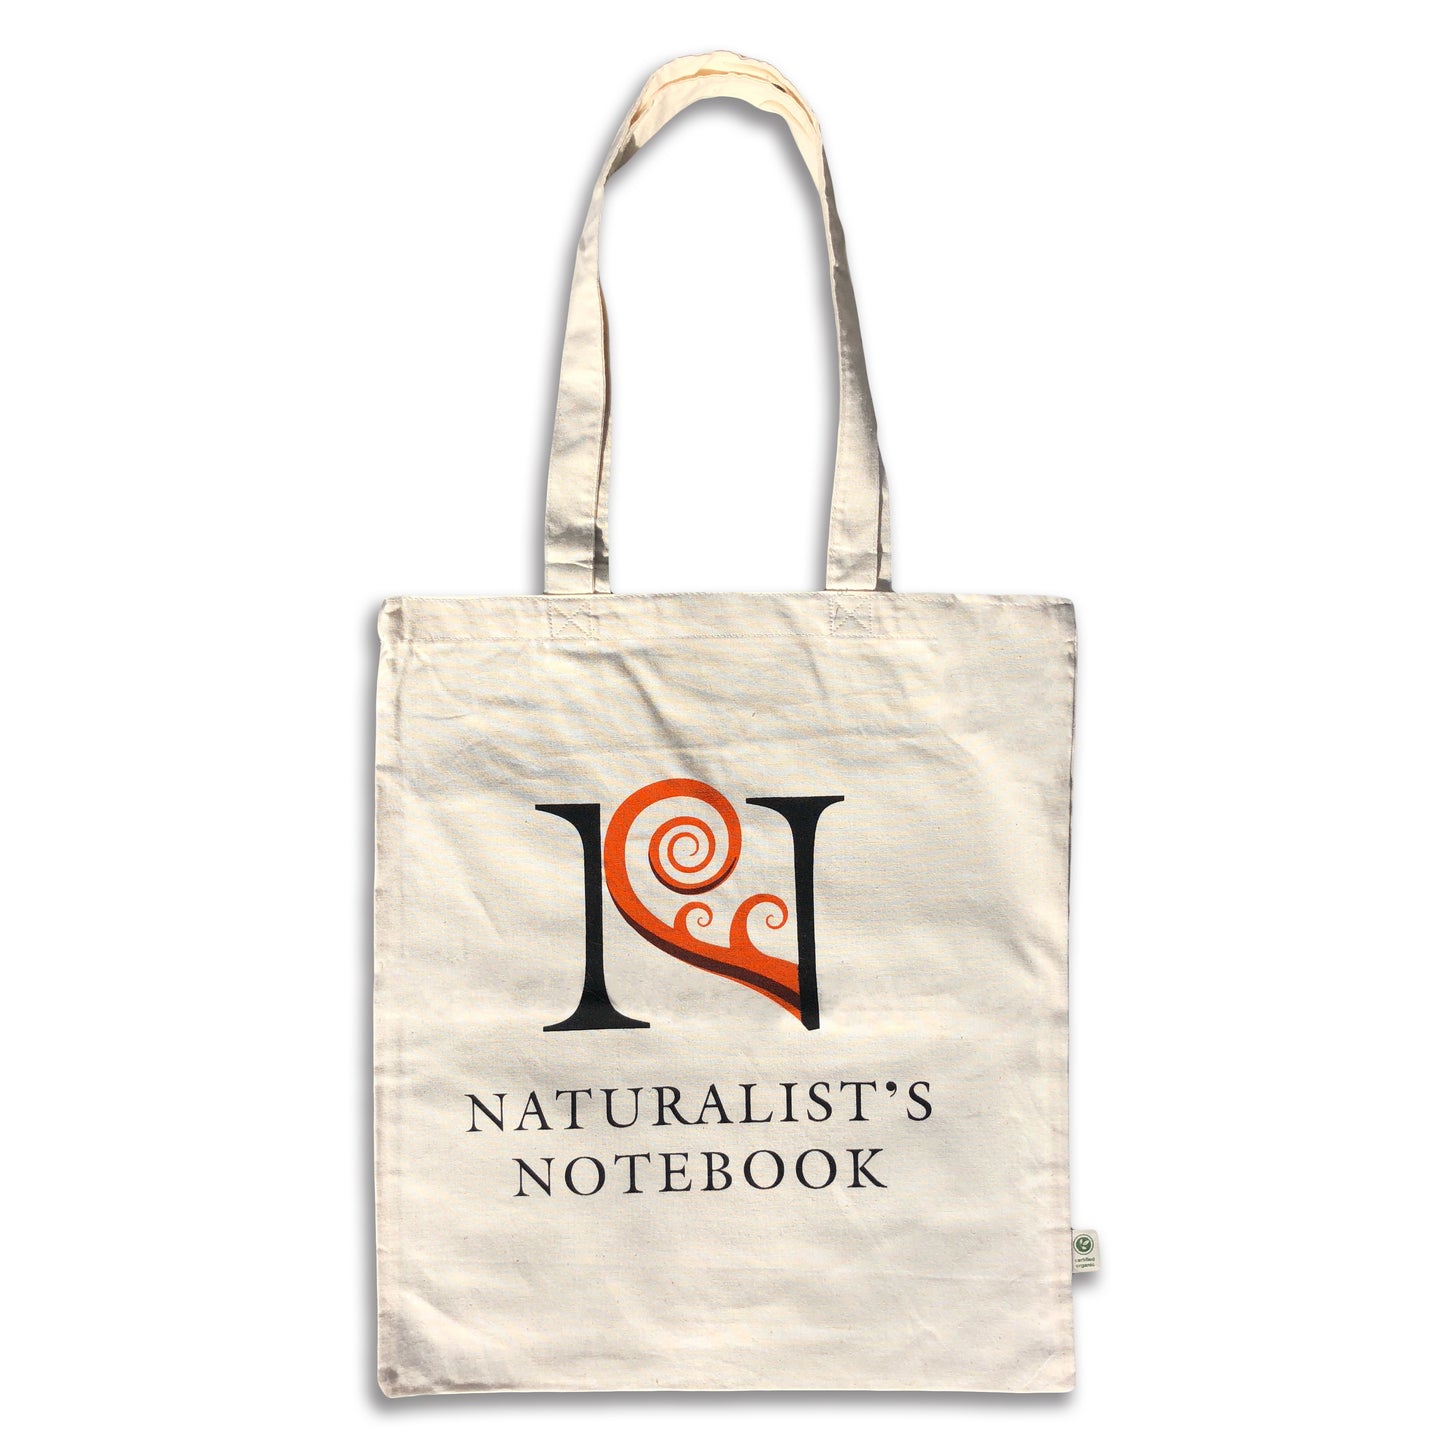 Naturalist's Notebook Tote